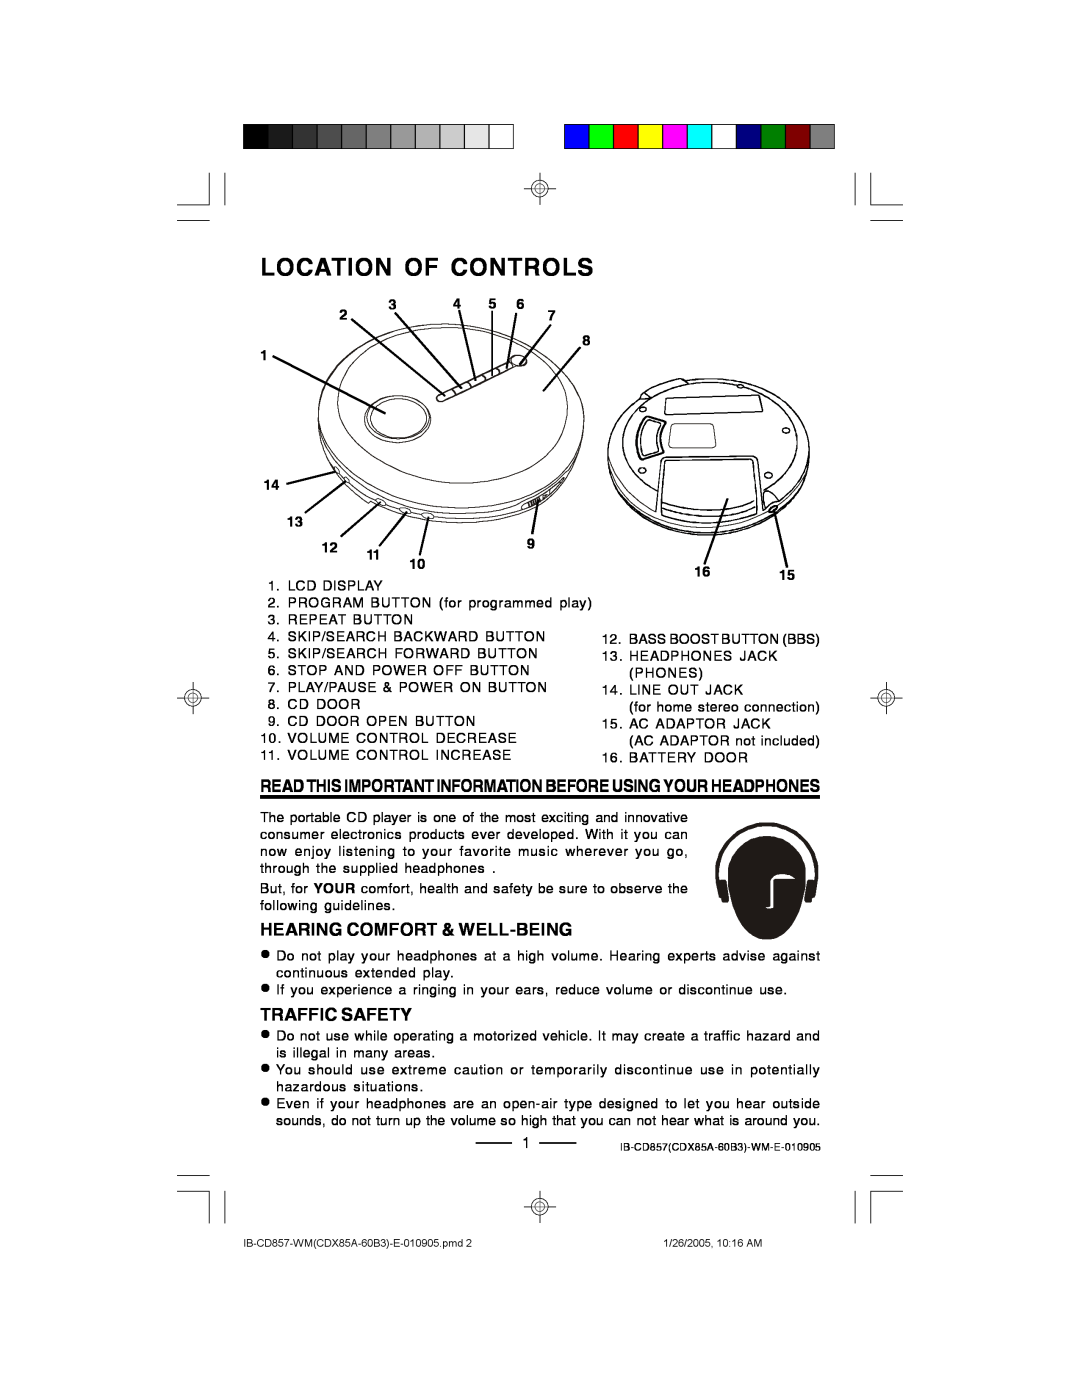 Lenoxx Electronics CD-857 manual Location Of Controls, Hearing Comfort & Well-Being, Traffic Safety, 1615 